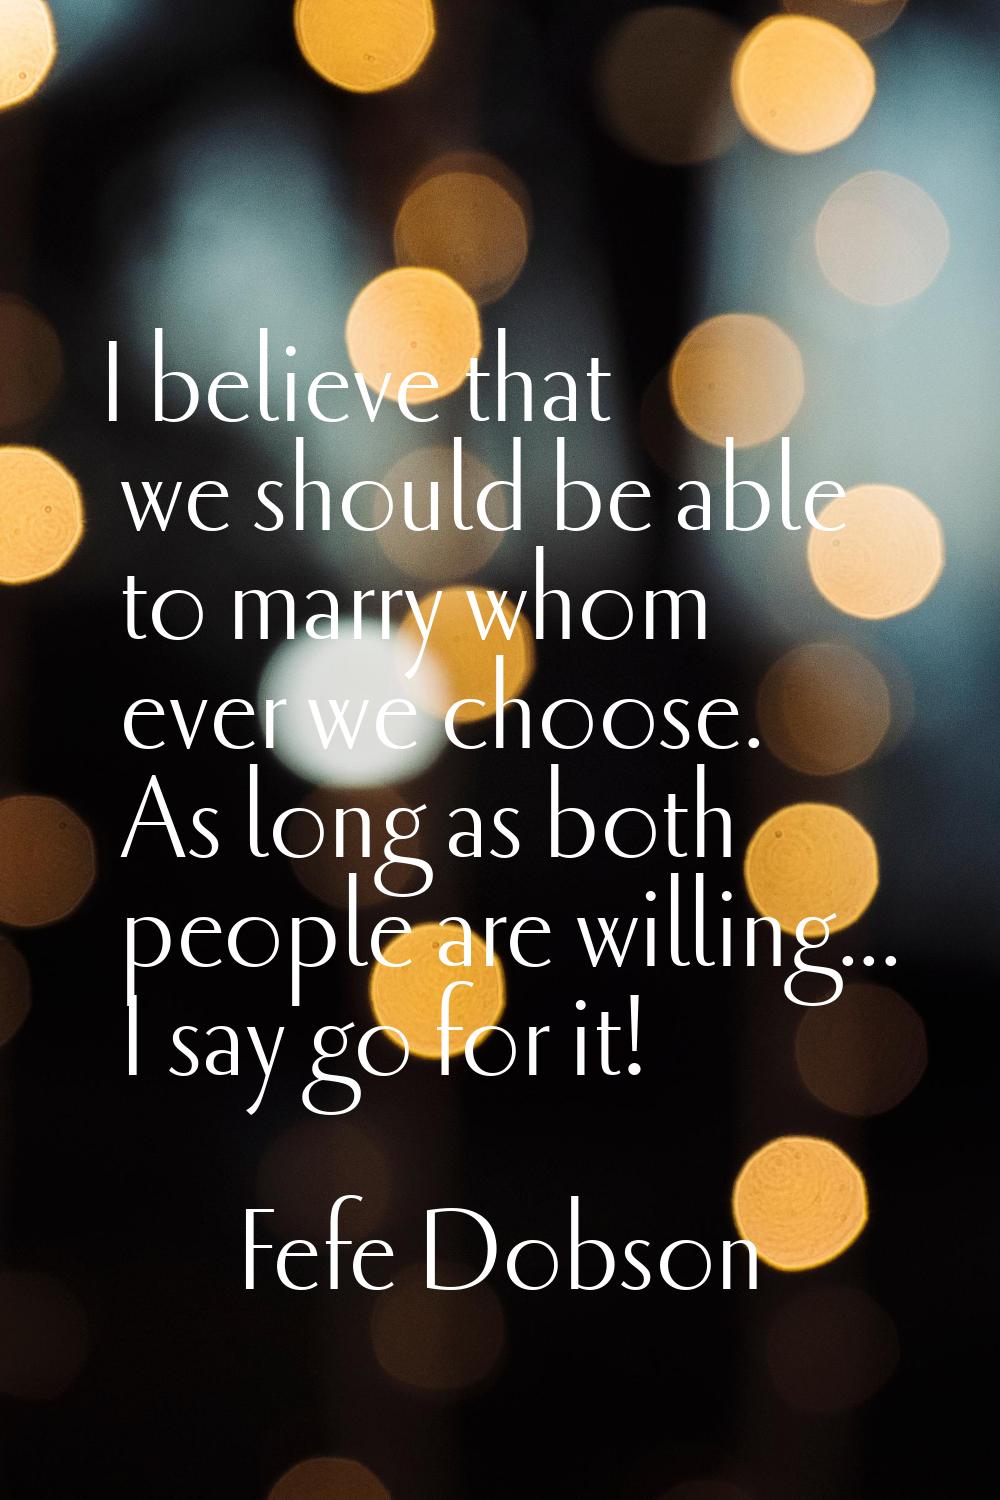 I believe that we should be able to marry whom ever we choose. As long as both people are willing..